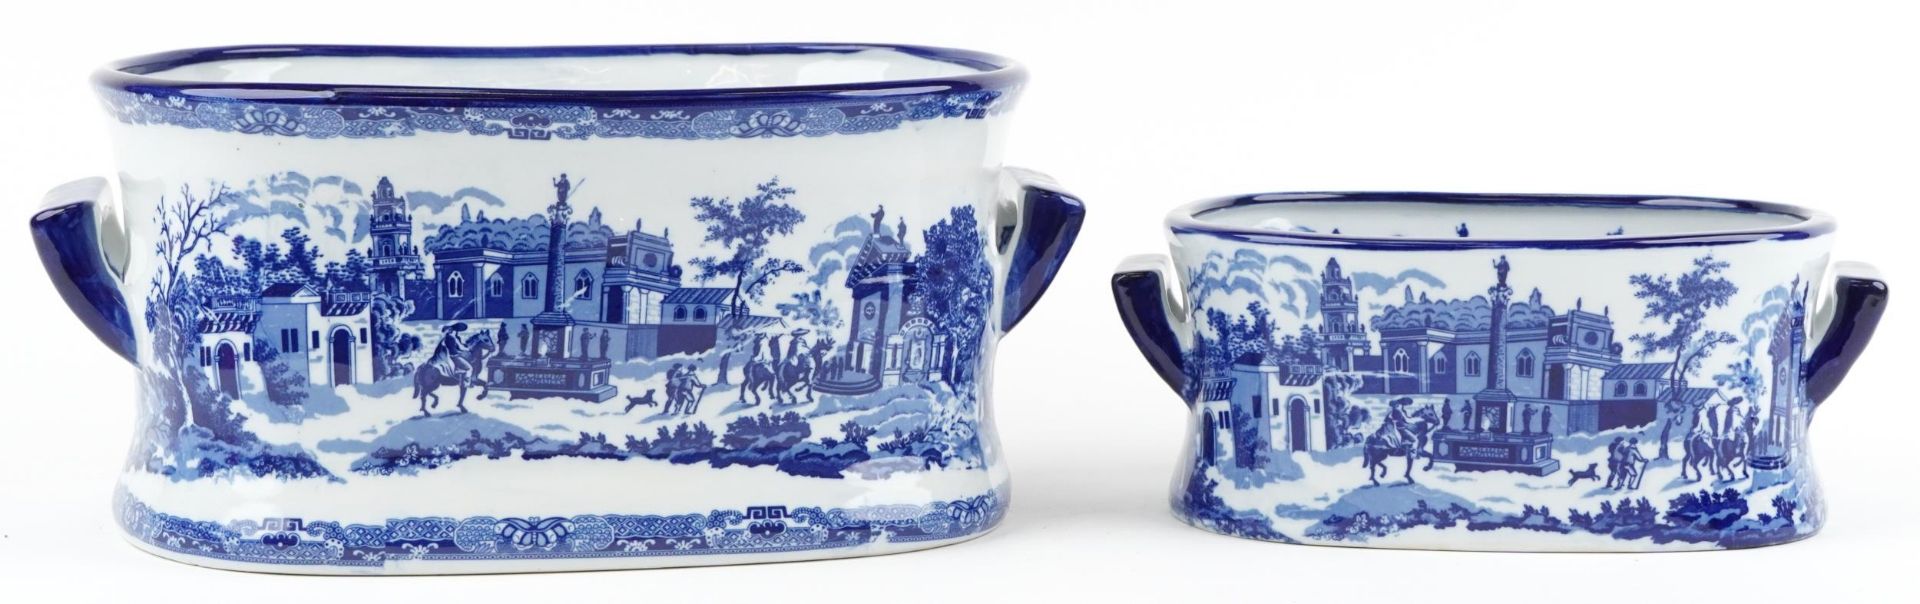 Two blue and white porcelain planters with twin handles, each decorated with cavaliers on horseback,